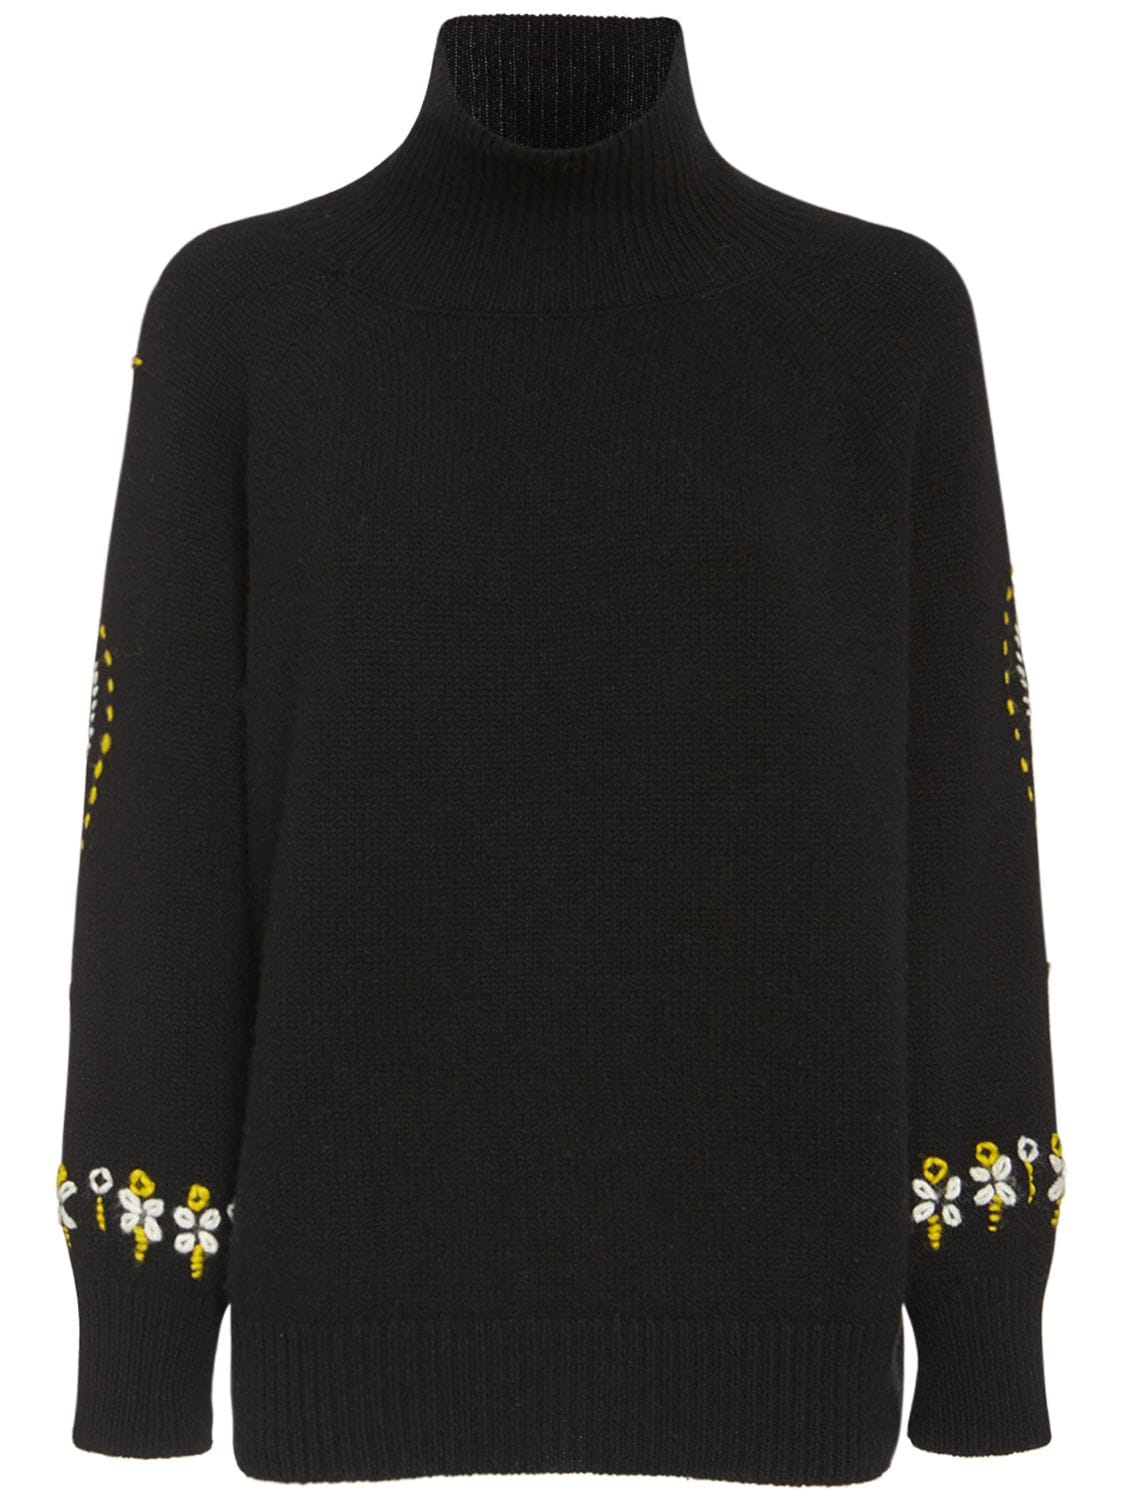 ERMANNO SCERVINO Embroidered Wool & Cashmere Knit Sweater